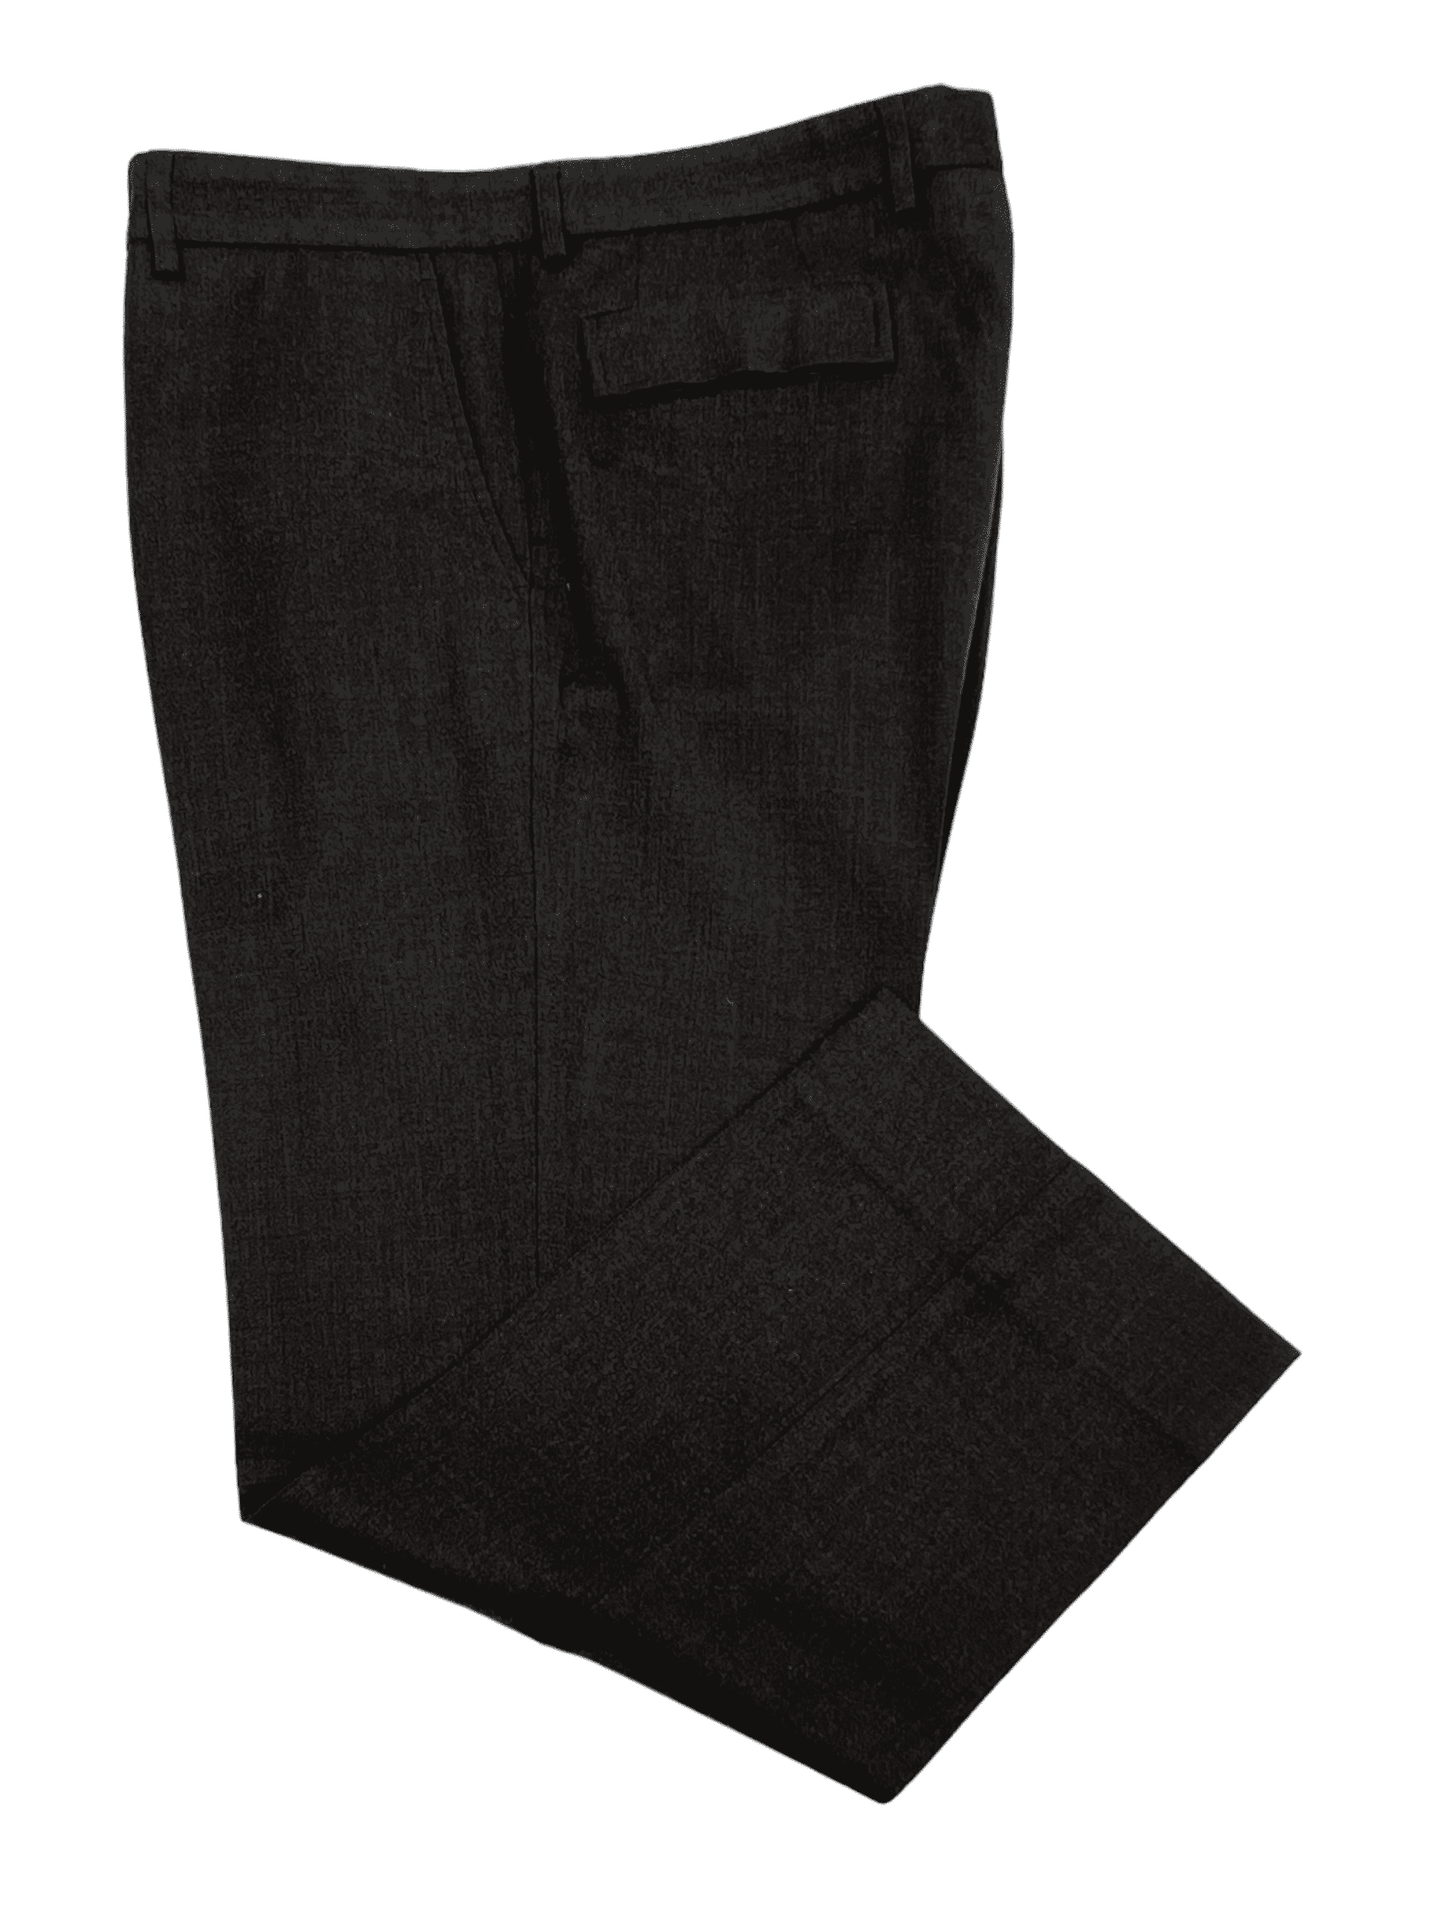 Hugo Boss Charcoal Grey Wool Dress Pant 37W 29L - Genuine Design Luxury Consignment Calgary, Alberta, Canada New and Pre-Owned Clothing, Shoes, Accessories.